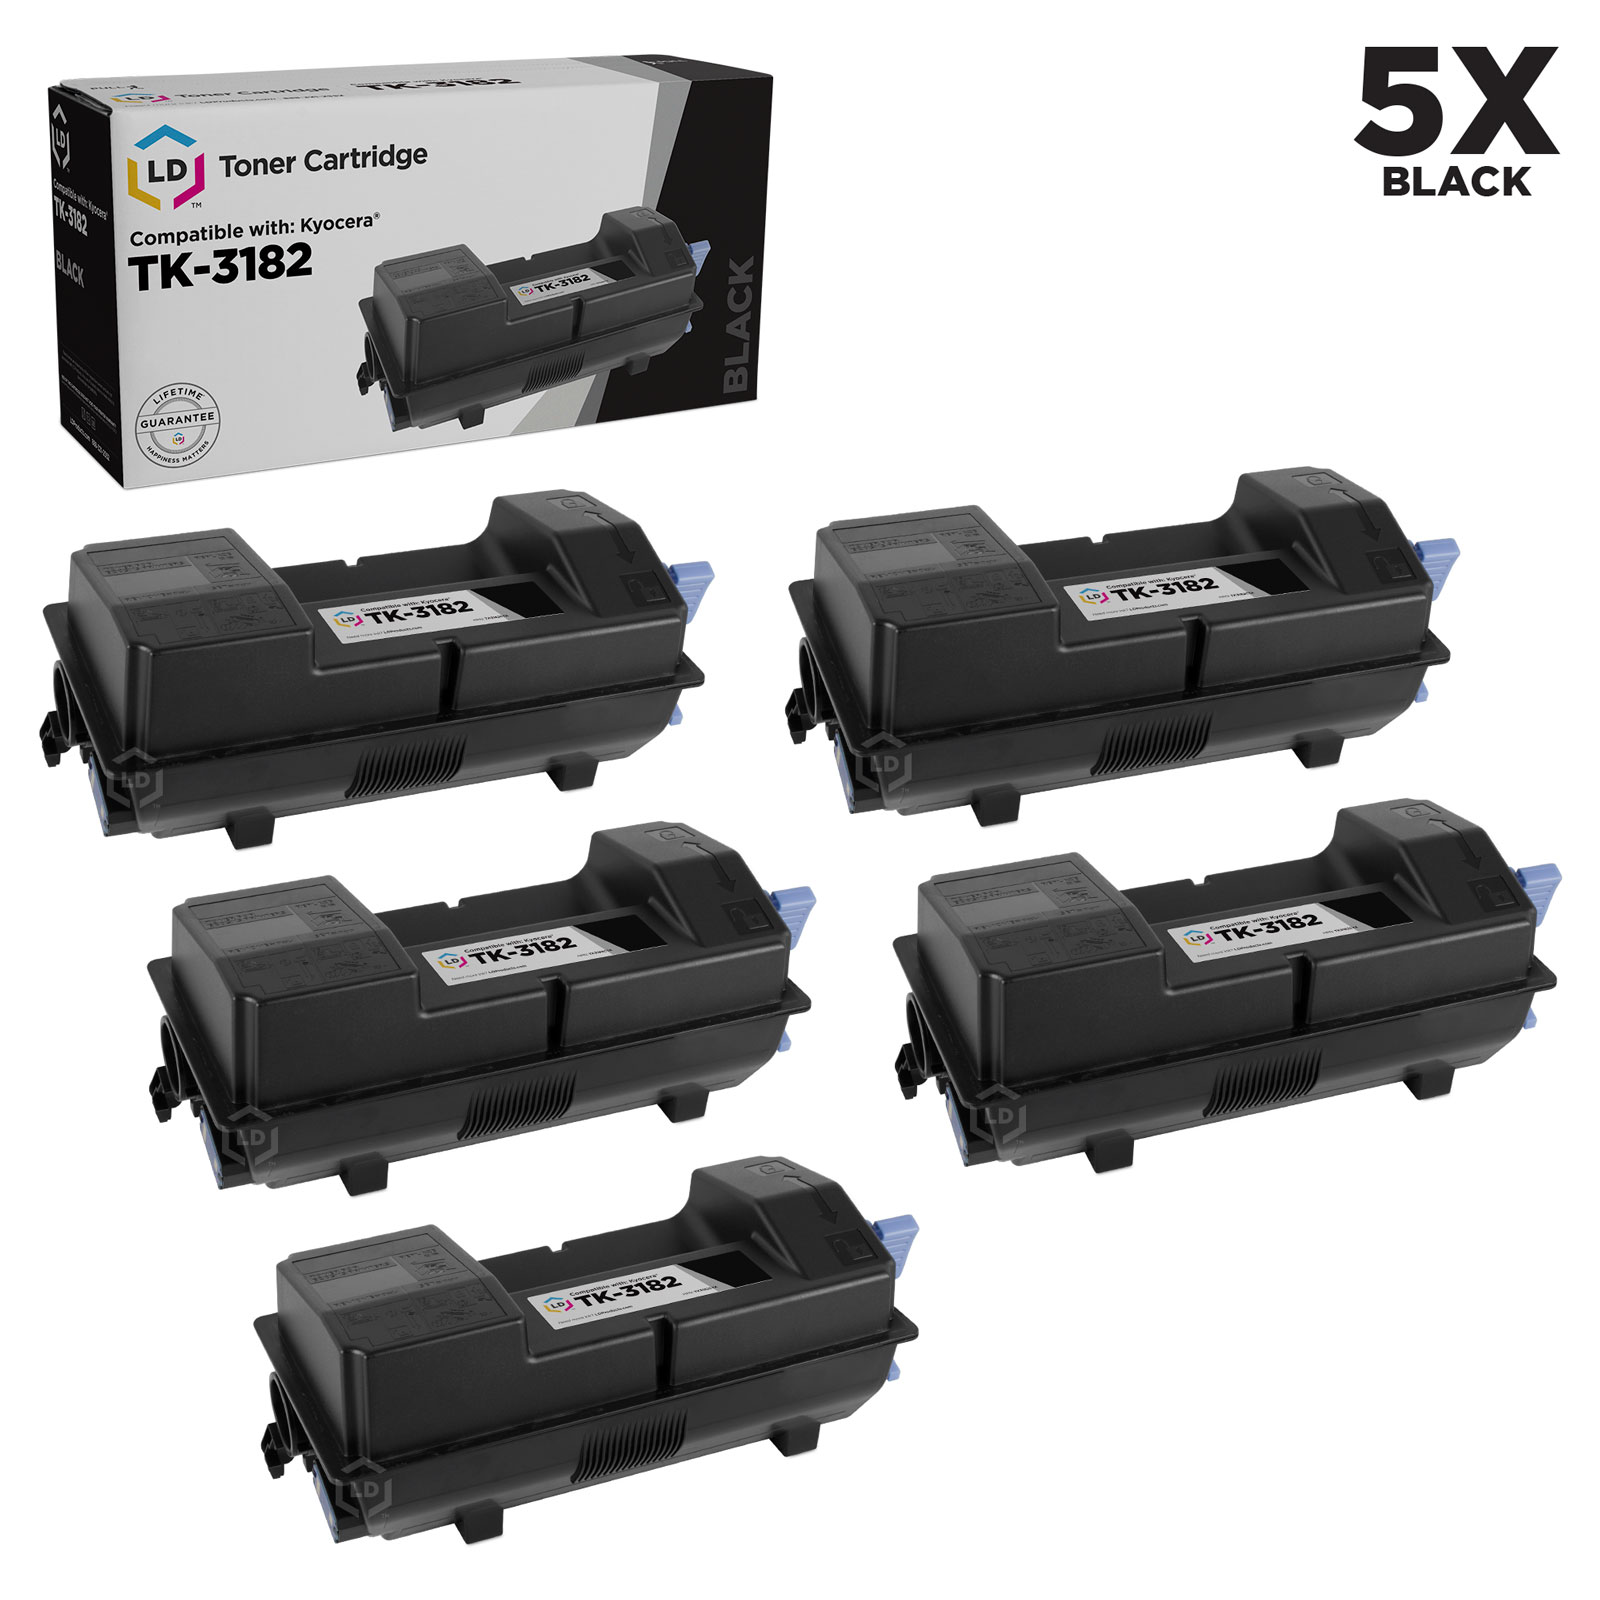 LD Compatible Toner Cartridge Replacement for Kyocera TK-3182 1T02T70US0 (Black, 5-Pack) - image 1 of 1